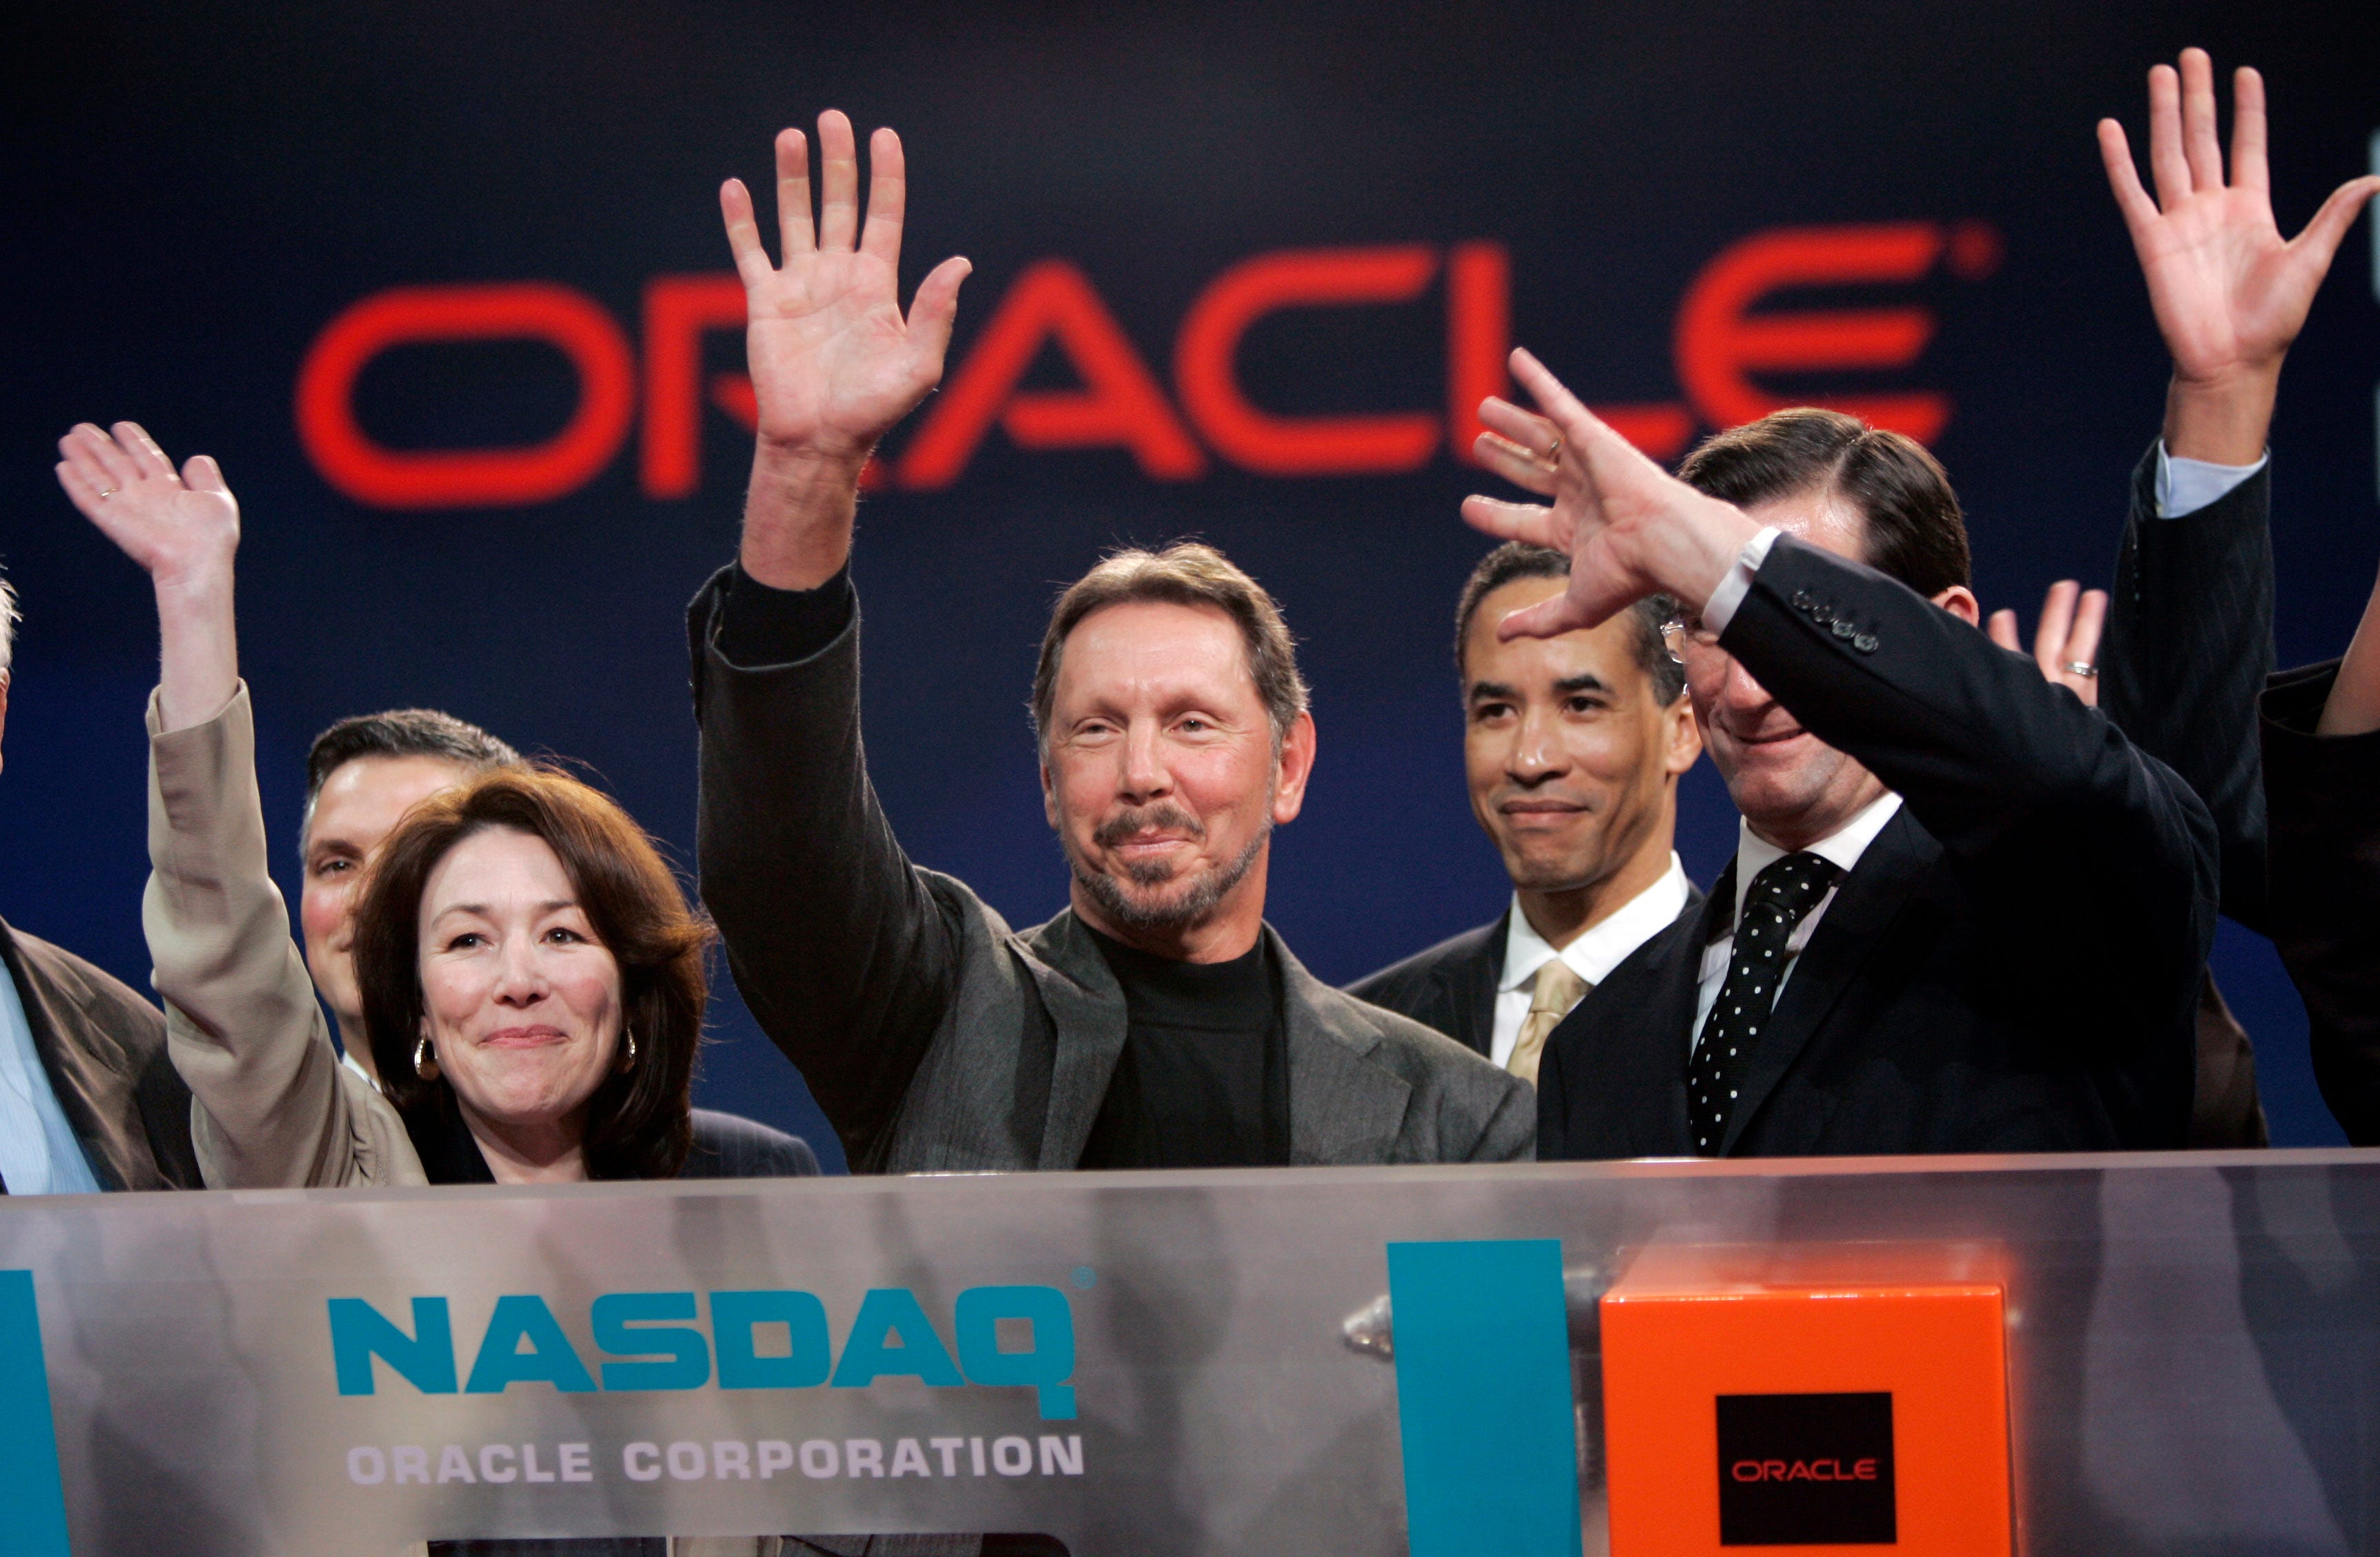 <p>As one of the key drivers of the growing computer industry, Oracle grew fast. The company is responsible for providing the databases in which businesses track information that is crucial to their operations.</p><p>Ellison became a billionaire at age 49. Now, he has a net worth of roughly $146 billion, according to Forbes, after racking up $50 billion in gains thanks to Oracle and Tesla stock. That makes him the seventh-richest person in the world.</p>